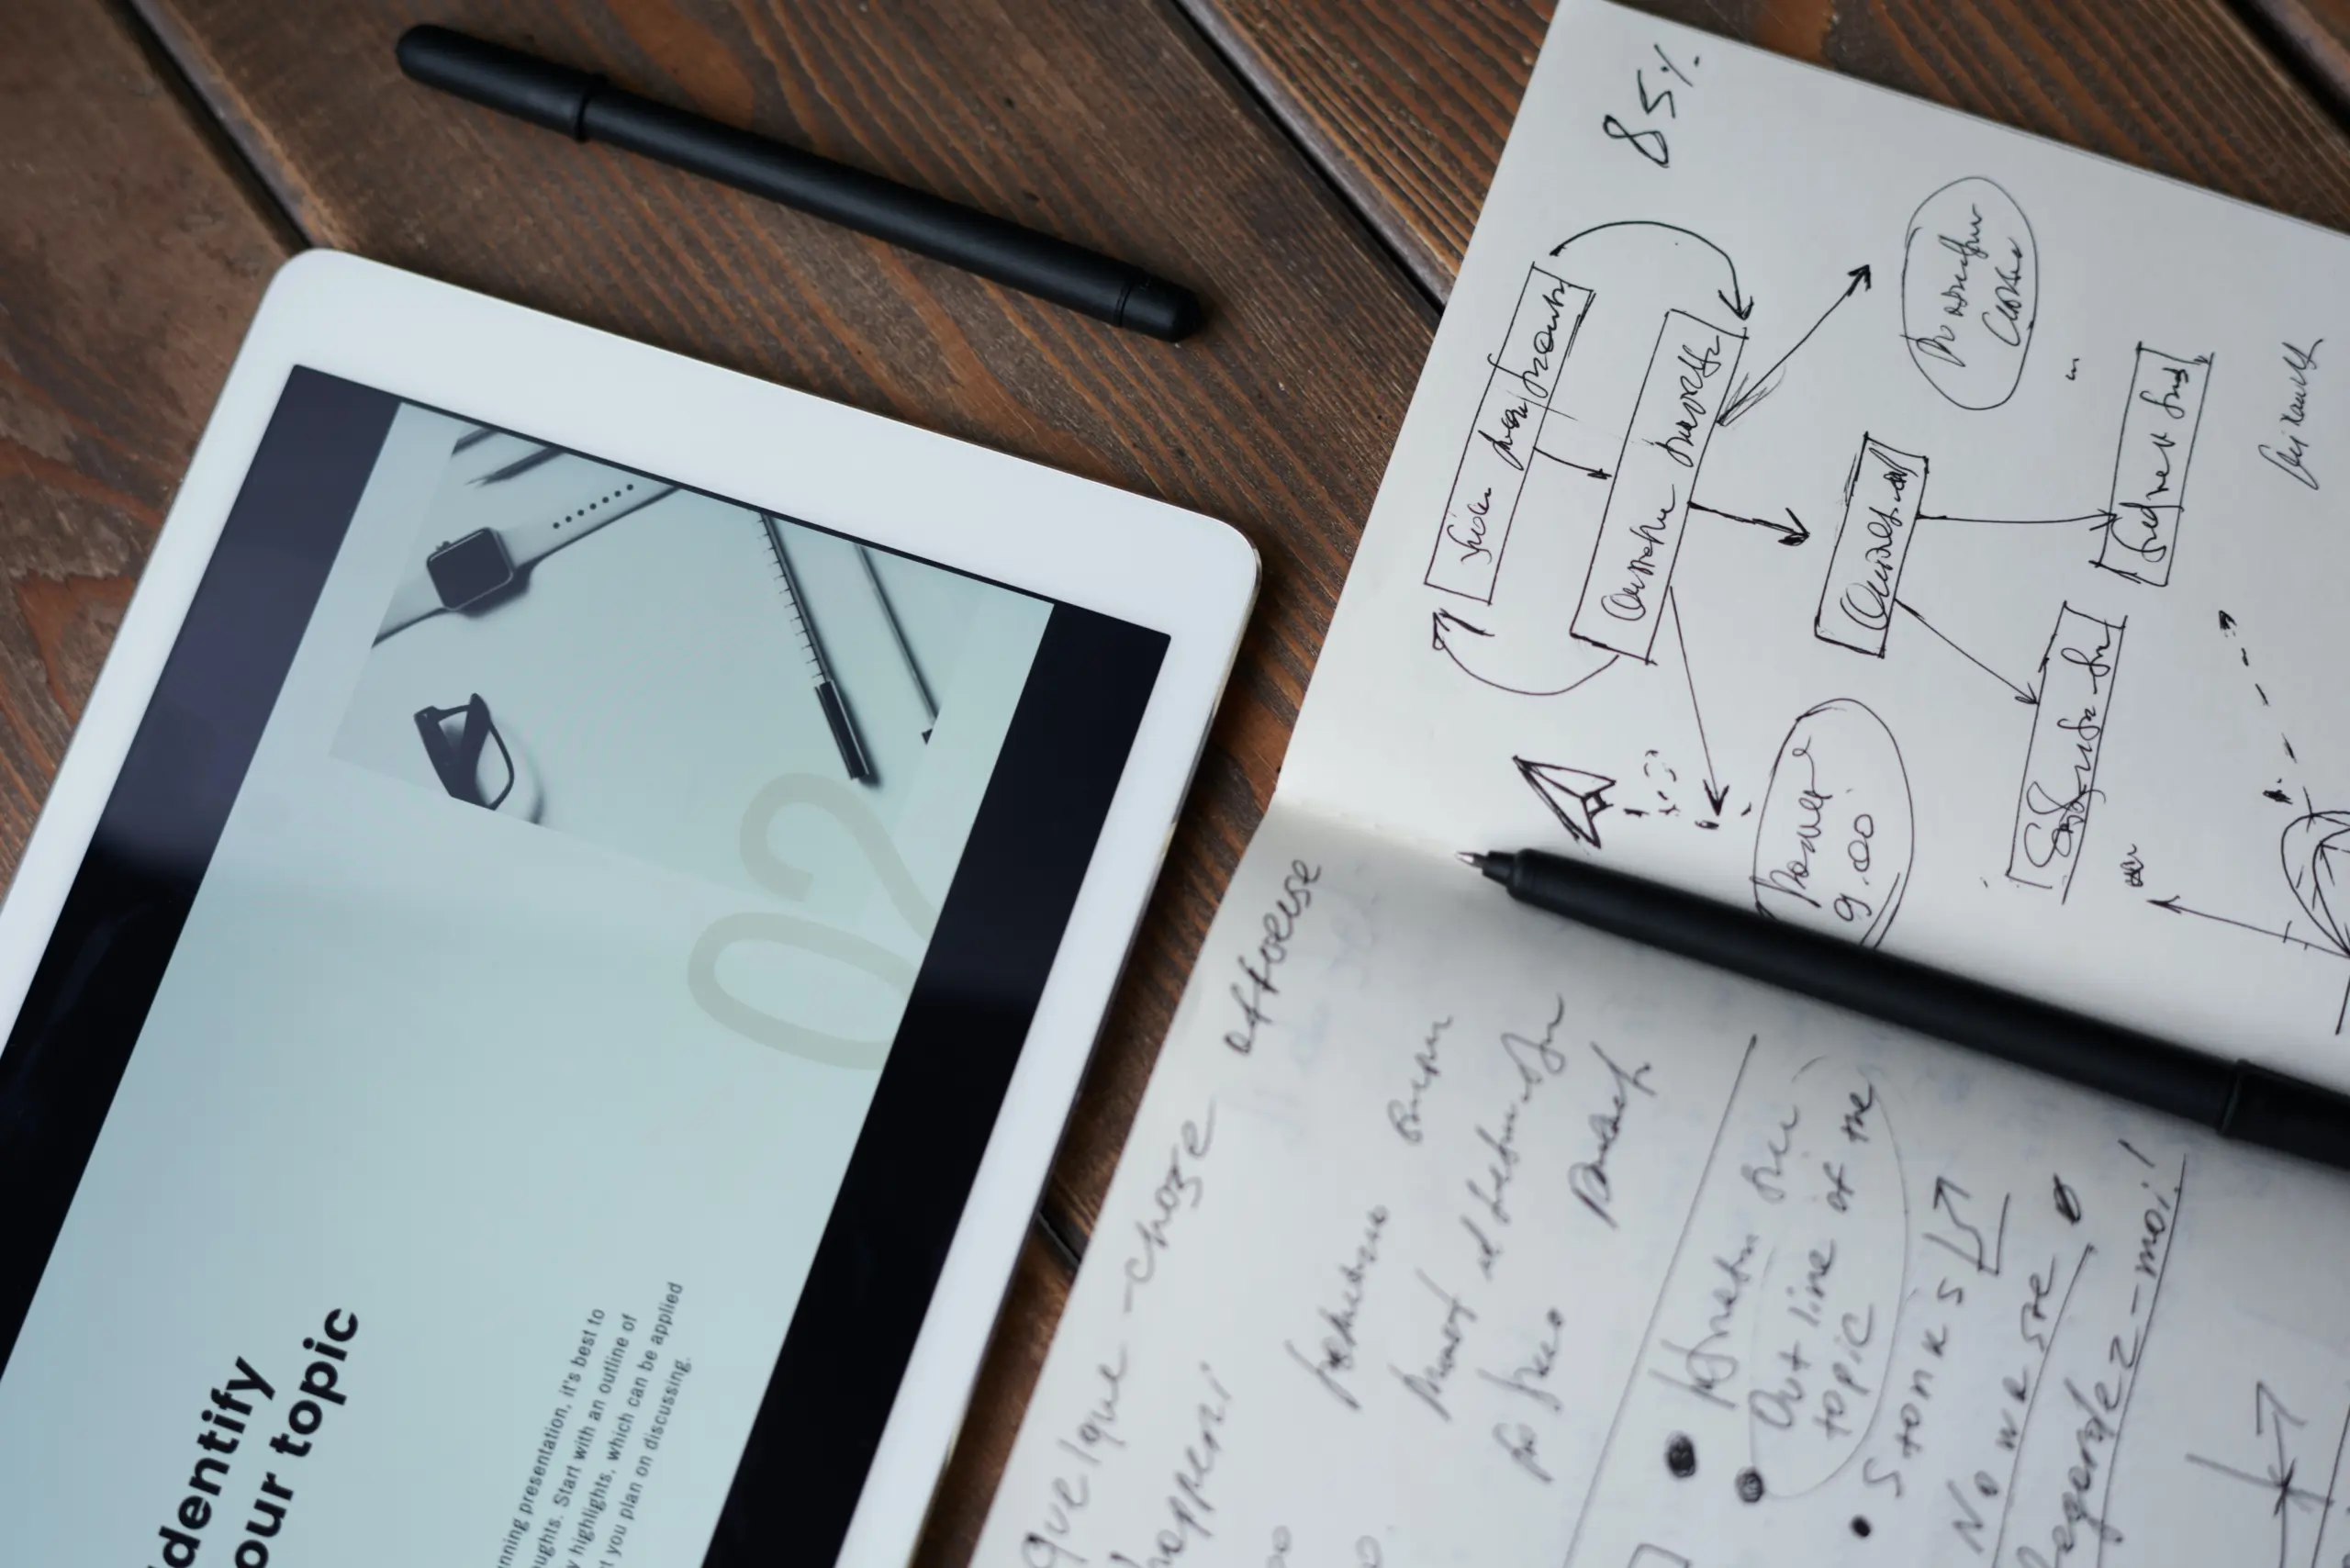 A tablet and a notebook with text - defining goals and objectives of content marketing strategy